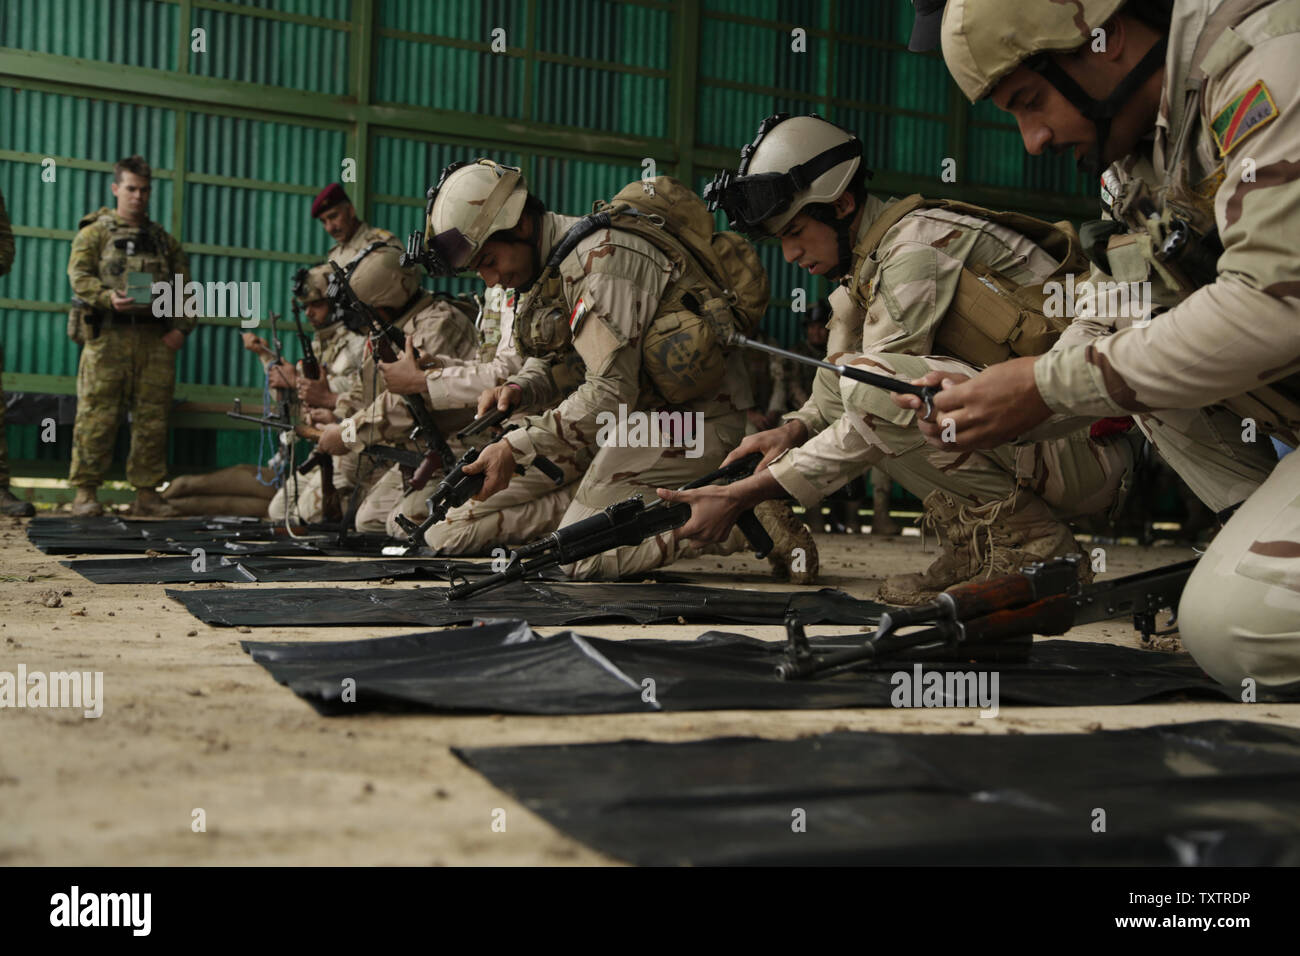 Iraqi soldiers with the 4th Battalion, 23rd Iraqi Army Brigade, practice disassembling their AK-47 assault rifles for a skills evaluation at Camp Taji, Iraq, on March 28, 2016. Task Group Taji conducted the skills evaluation to gauge the soldiersÕ proficiency in basic combat tasks. Through advise and assist, and building partner capacity missions, the Combined Joint Task Force C Operation Inherent ResolveÕs multinational coalition has trained more than 19.9K personnel to defeat the Islamic State of Iraq and the Levant. Photo by Sgt. Paul Sale/U.S. Army/UPI Stock Photo